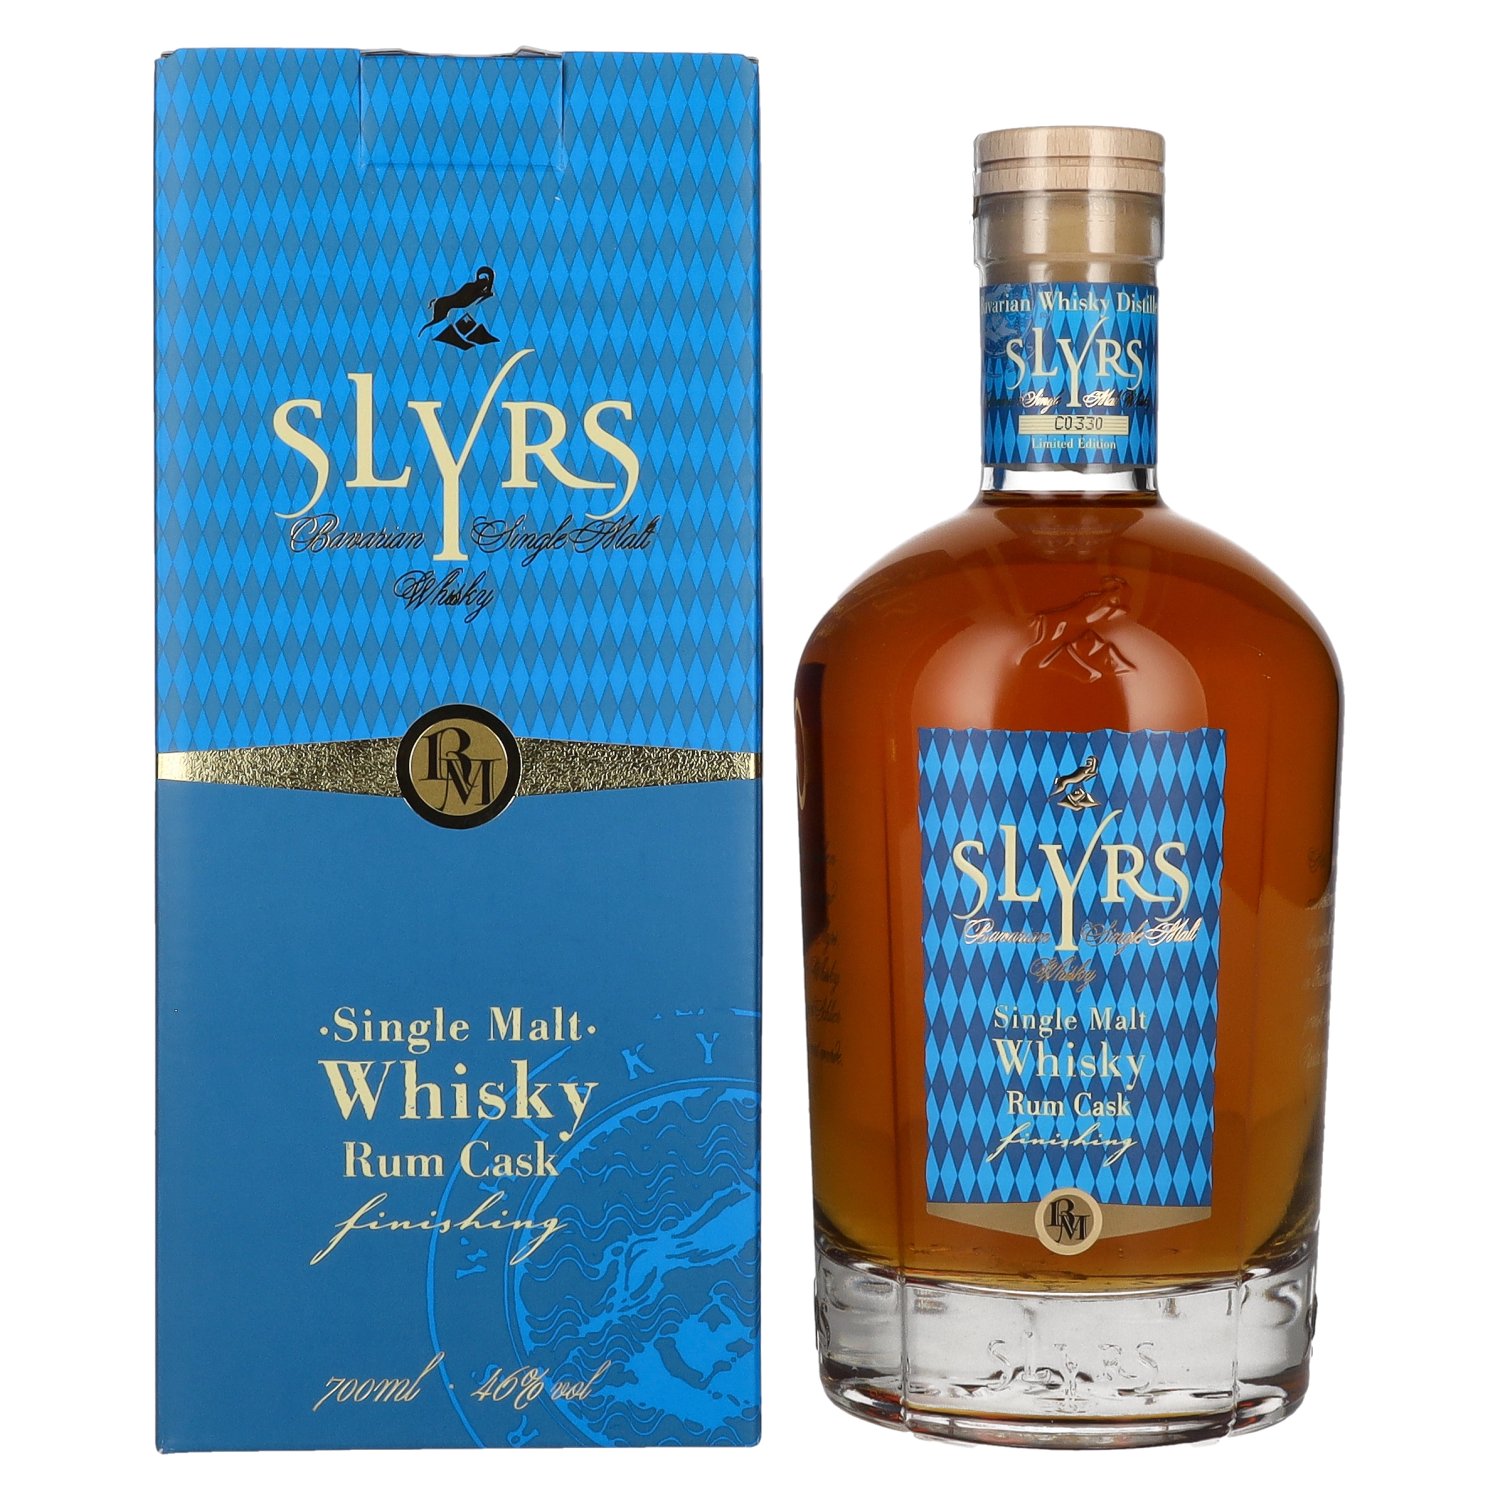 Edition Whisky Limited RUM 0,7l Single CASK 46% FINISH Slyrs in Giftbox Vol. Malt